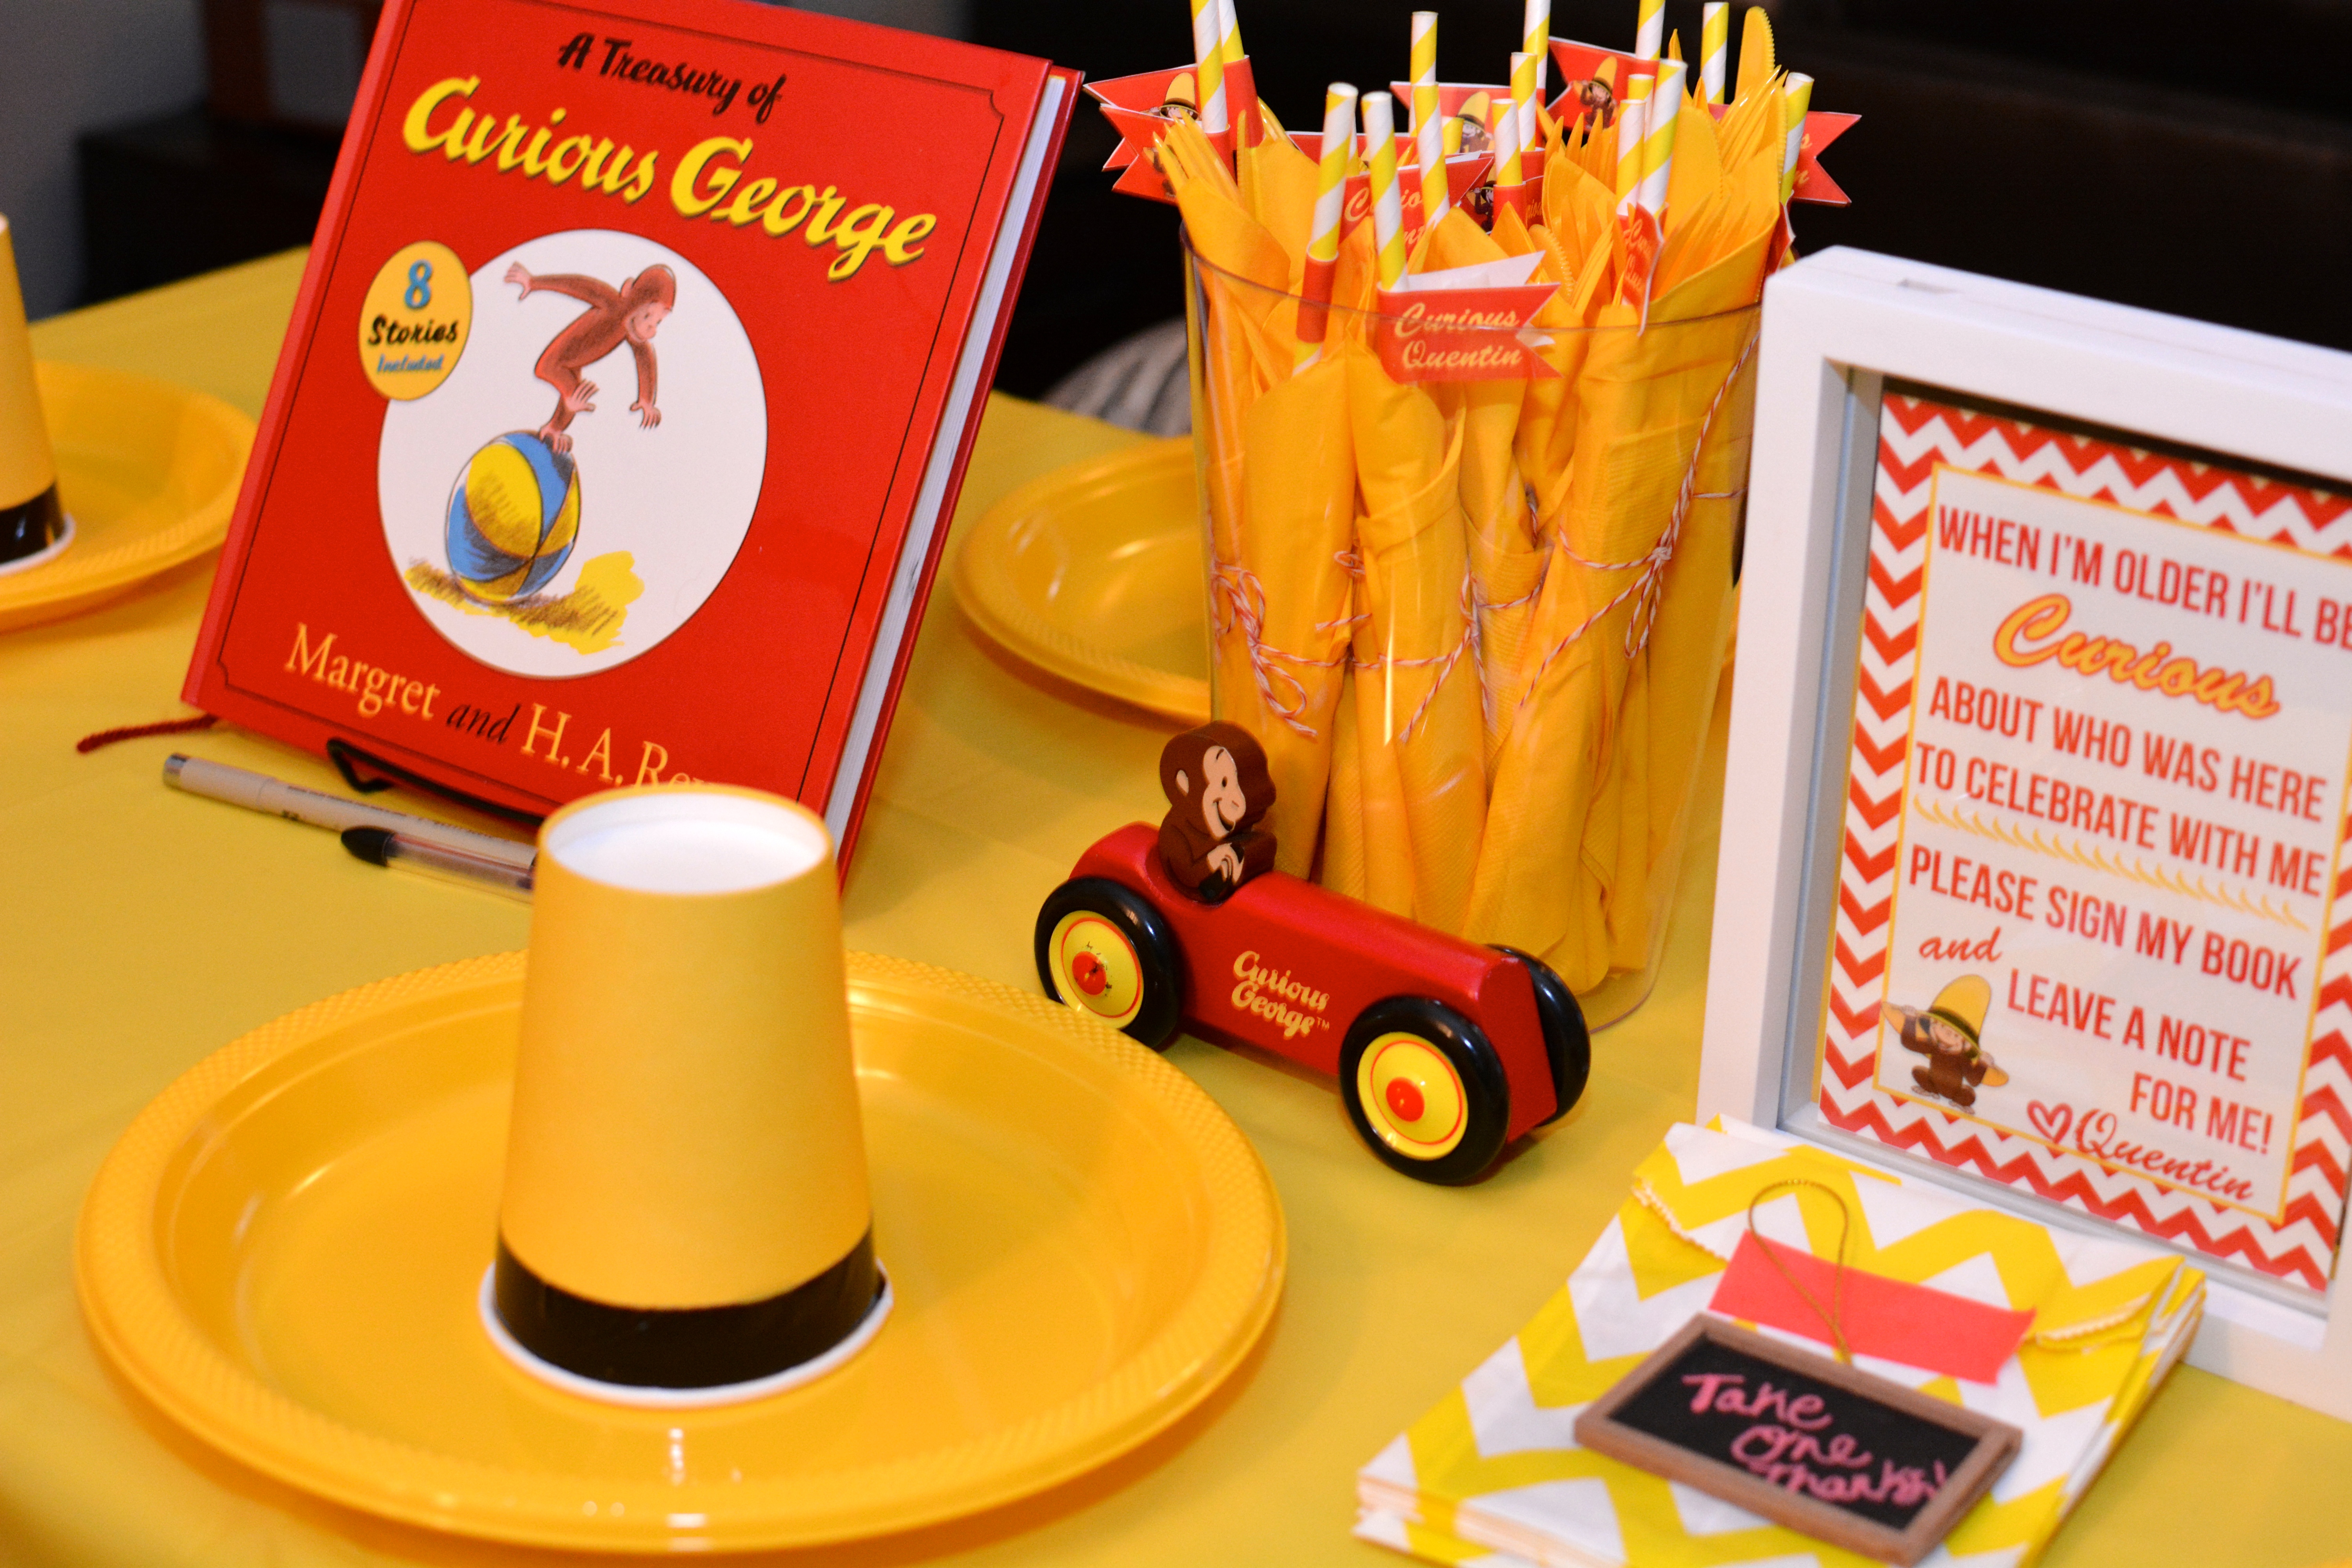 Curious George Book Signing and Birthday Party Favors